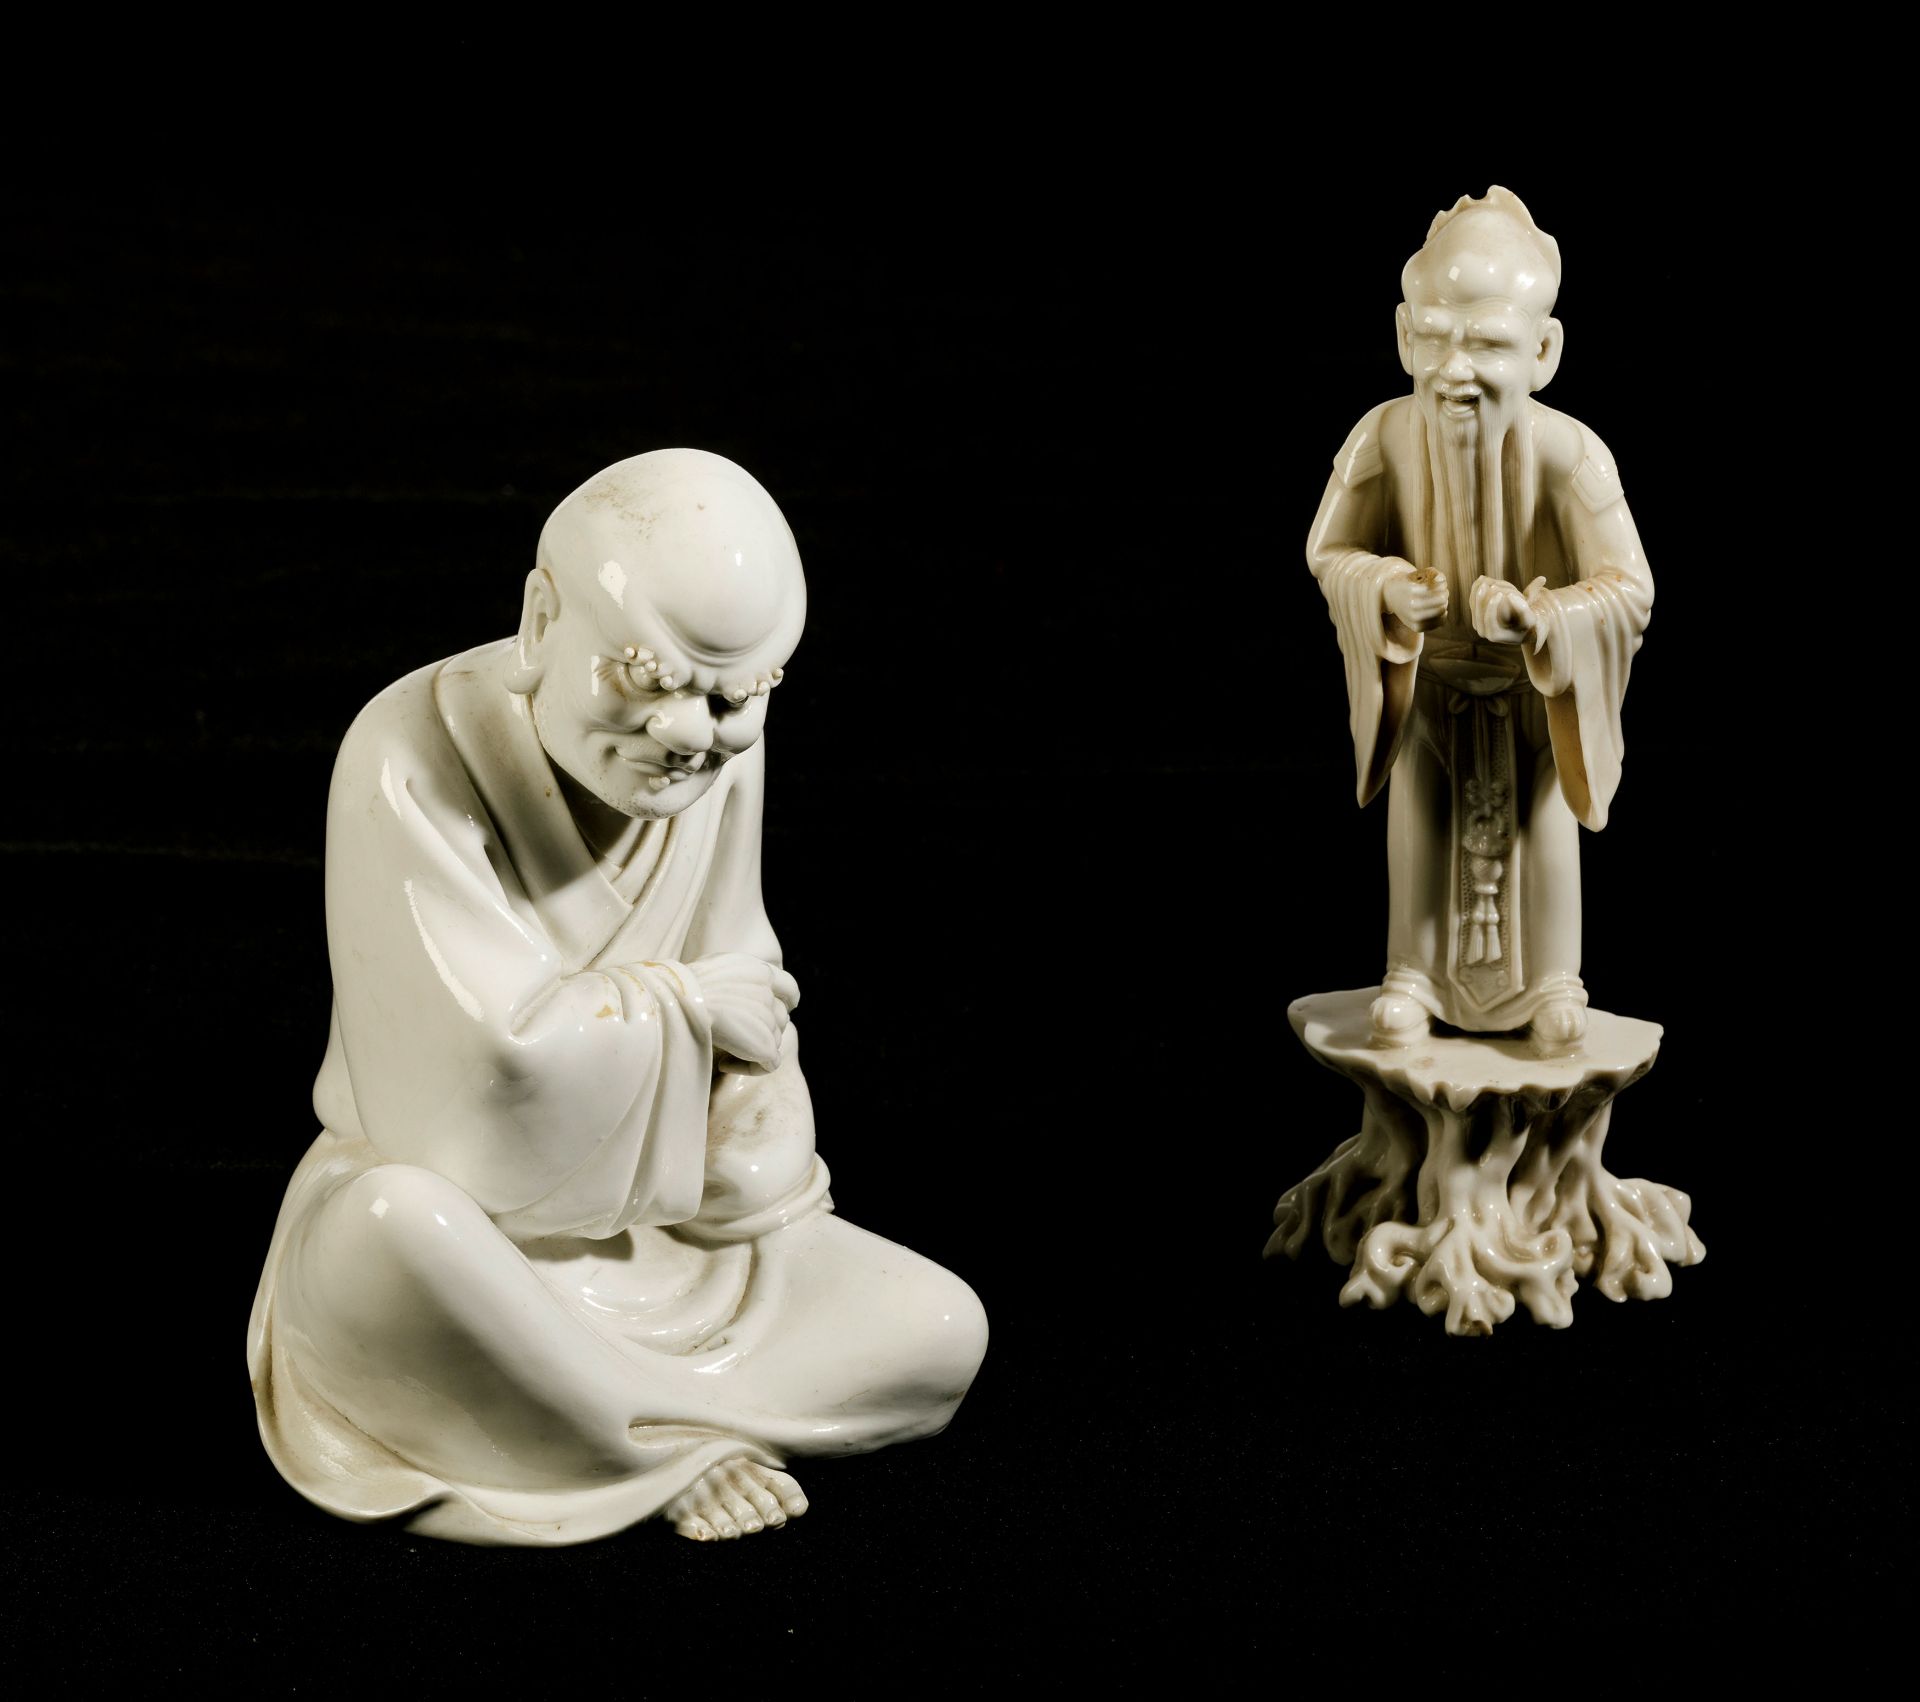 TWO BLANC-DE-CHINE PORCELAIN FIGURES, CHINA, 19TH-20TH CENTURY (2)